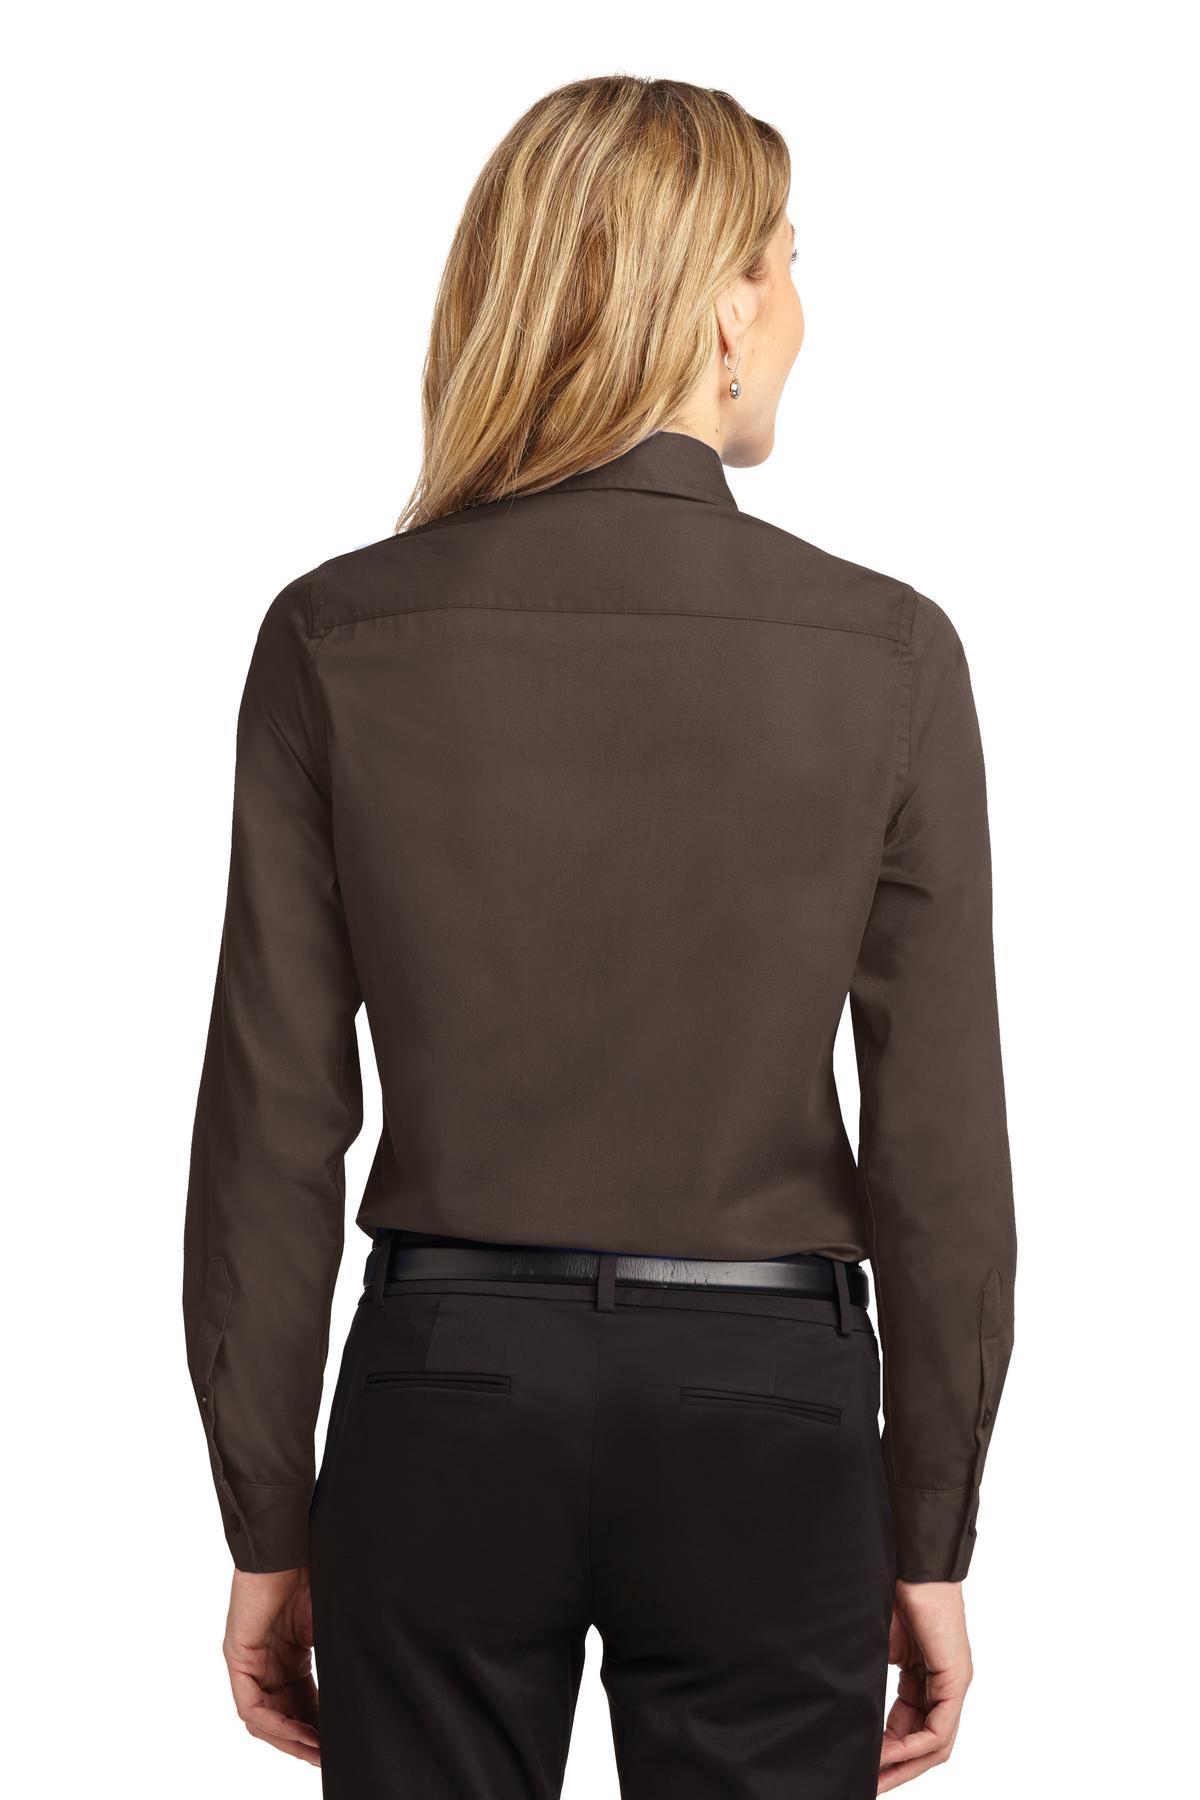 Port Authority ® Ladies Long Sleeve Easy Care Shirt. L608 - image 2 of 6